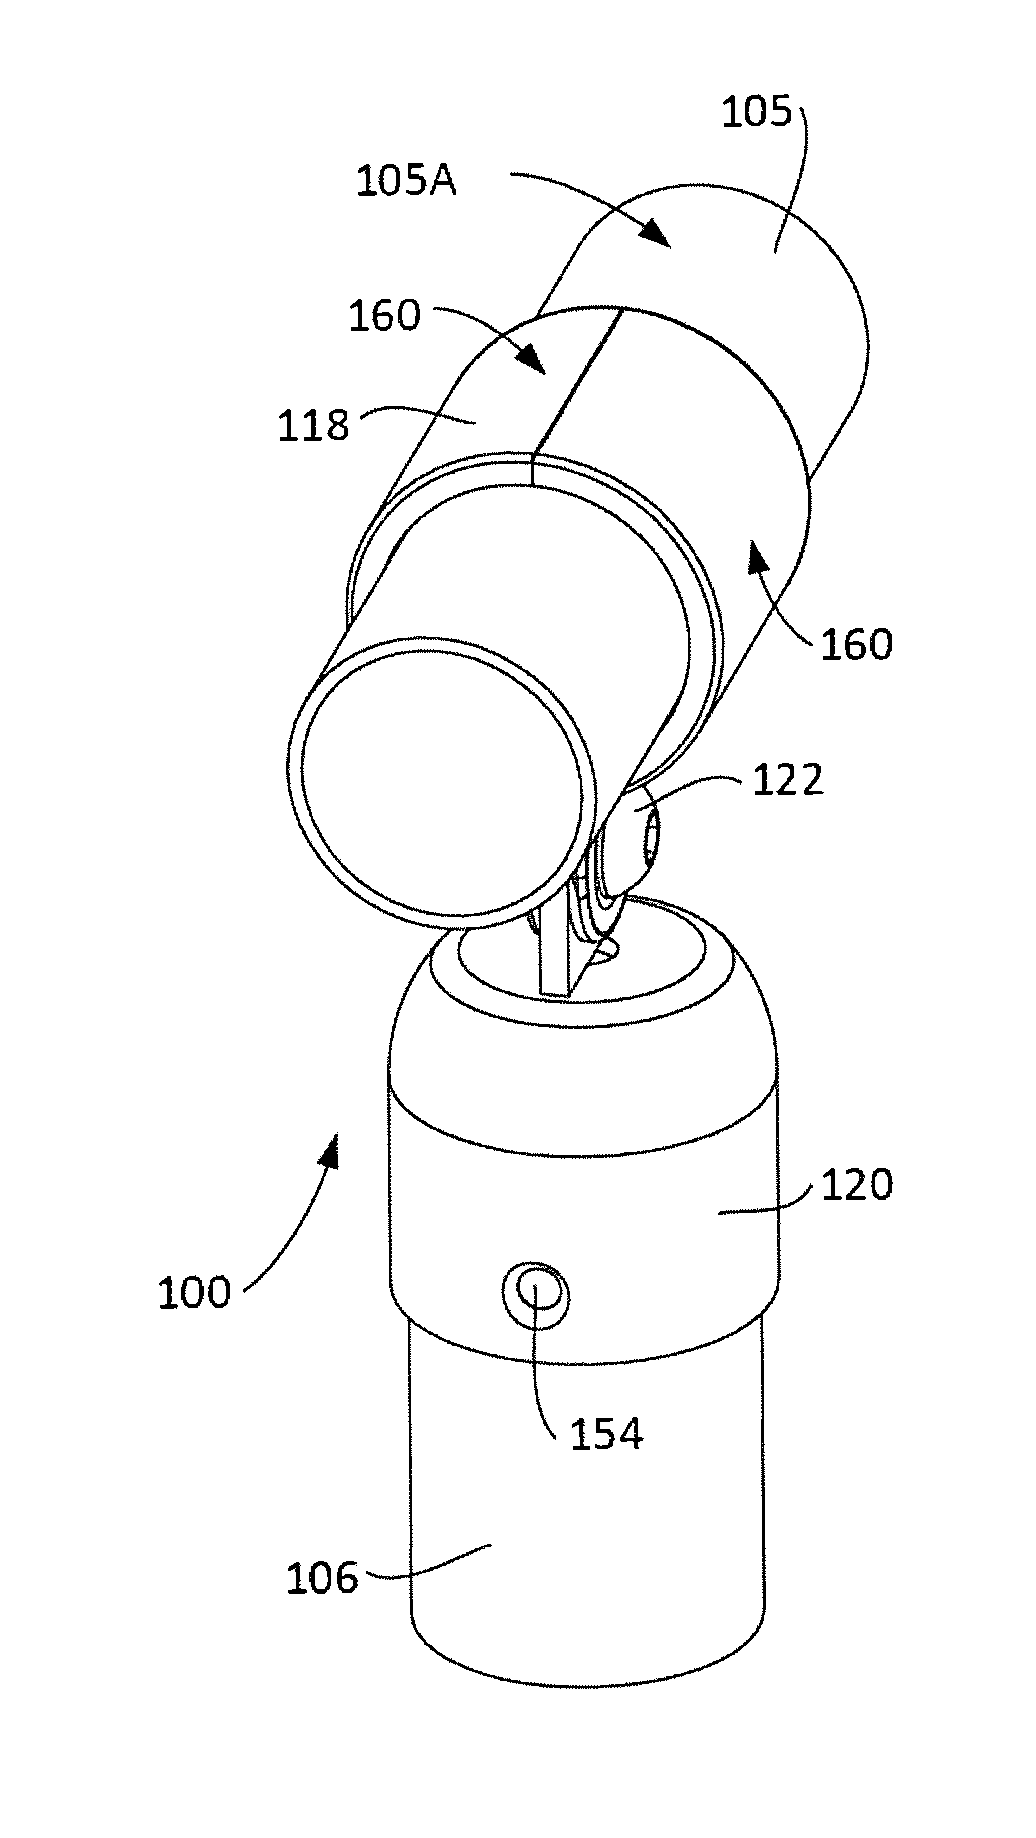 Mounting fixture of a connection fixture